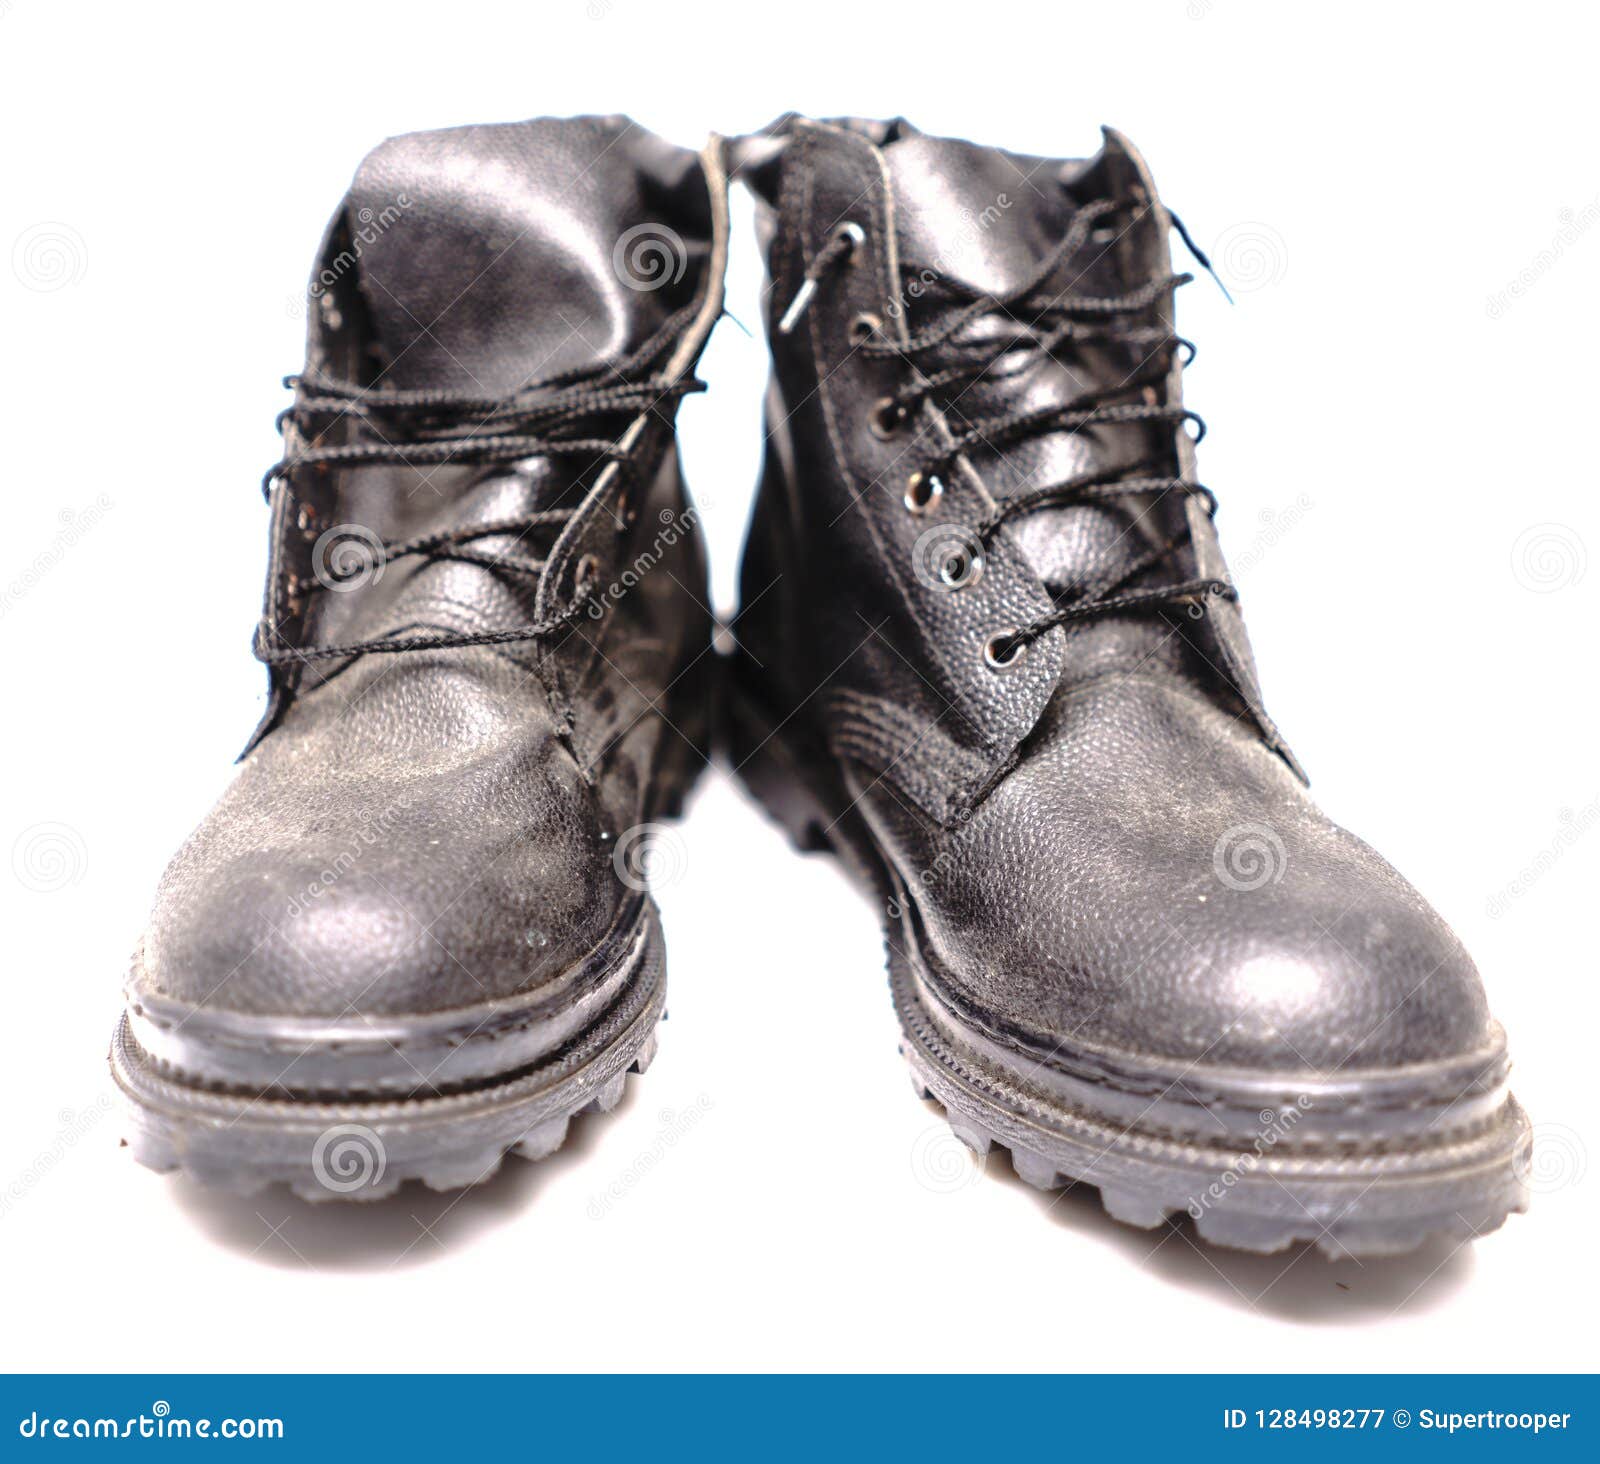 Protection Worker Shoes stock image. Image of hard, danger - 128498277